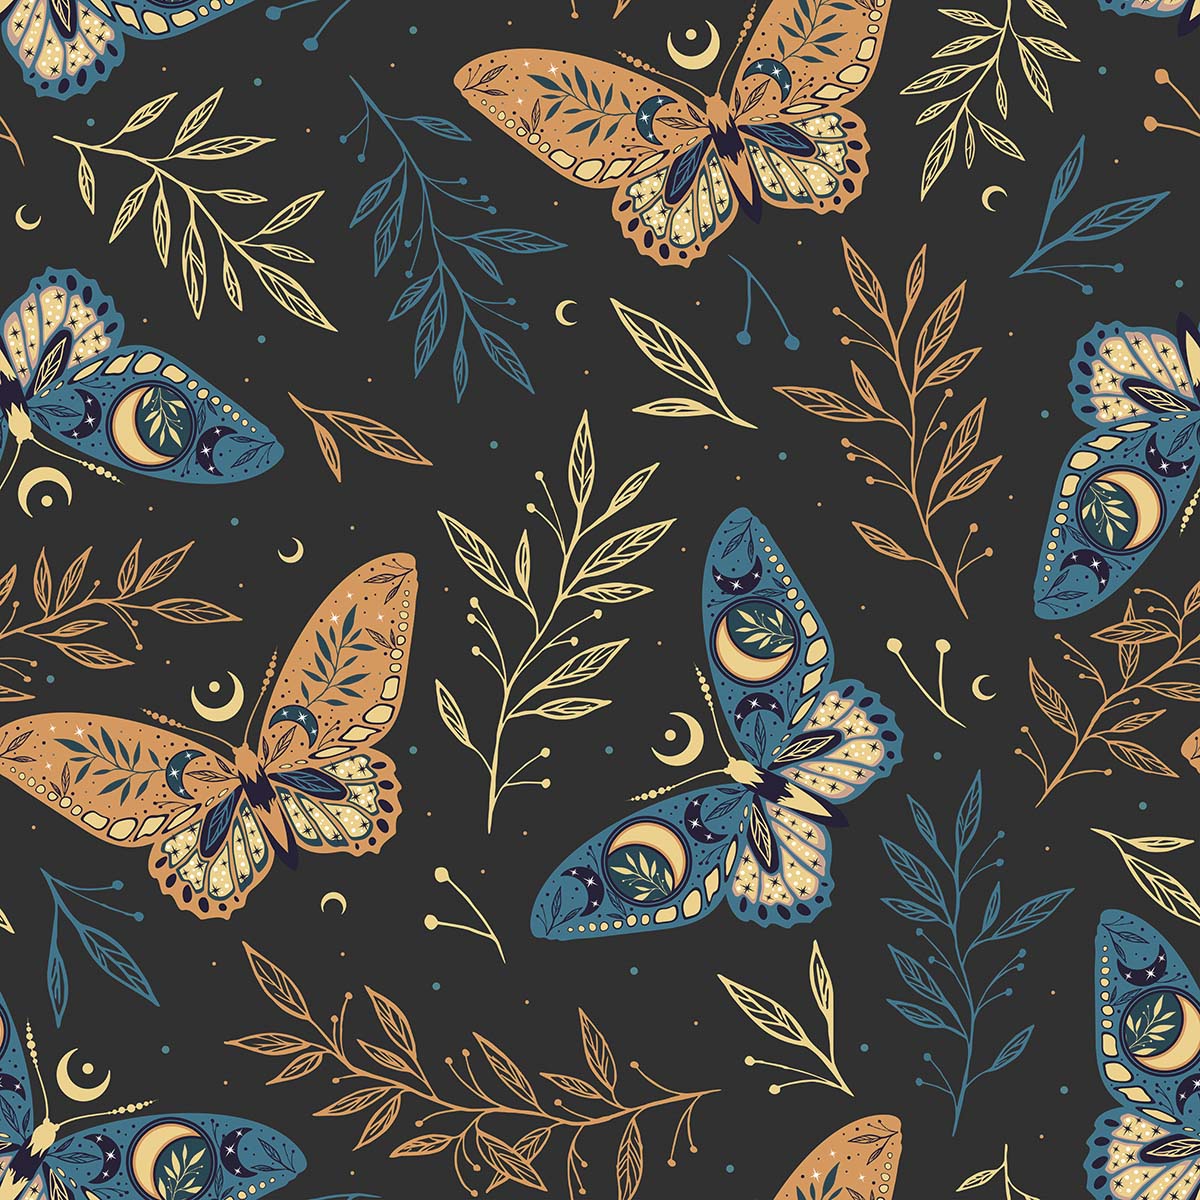 A pattern of butterflies and leaves